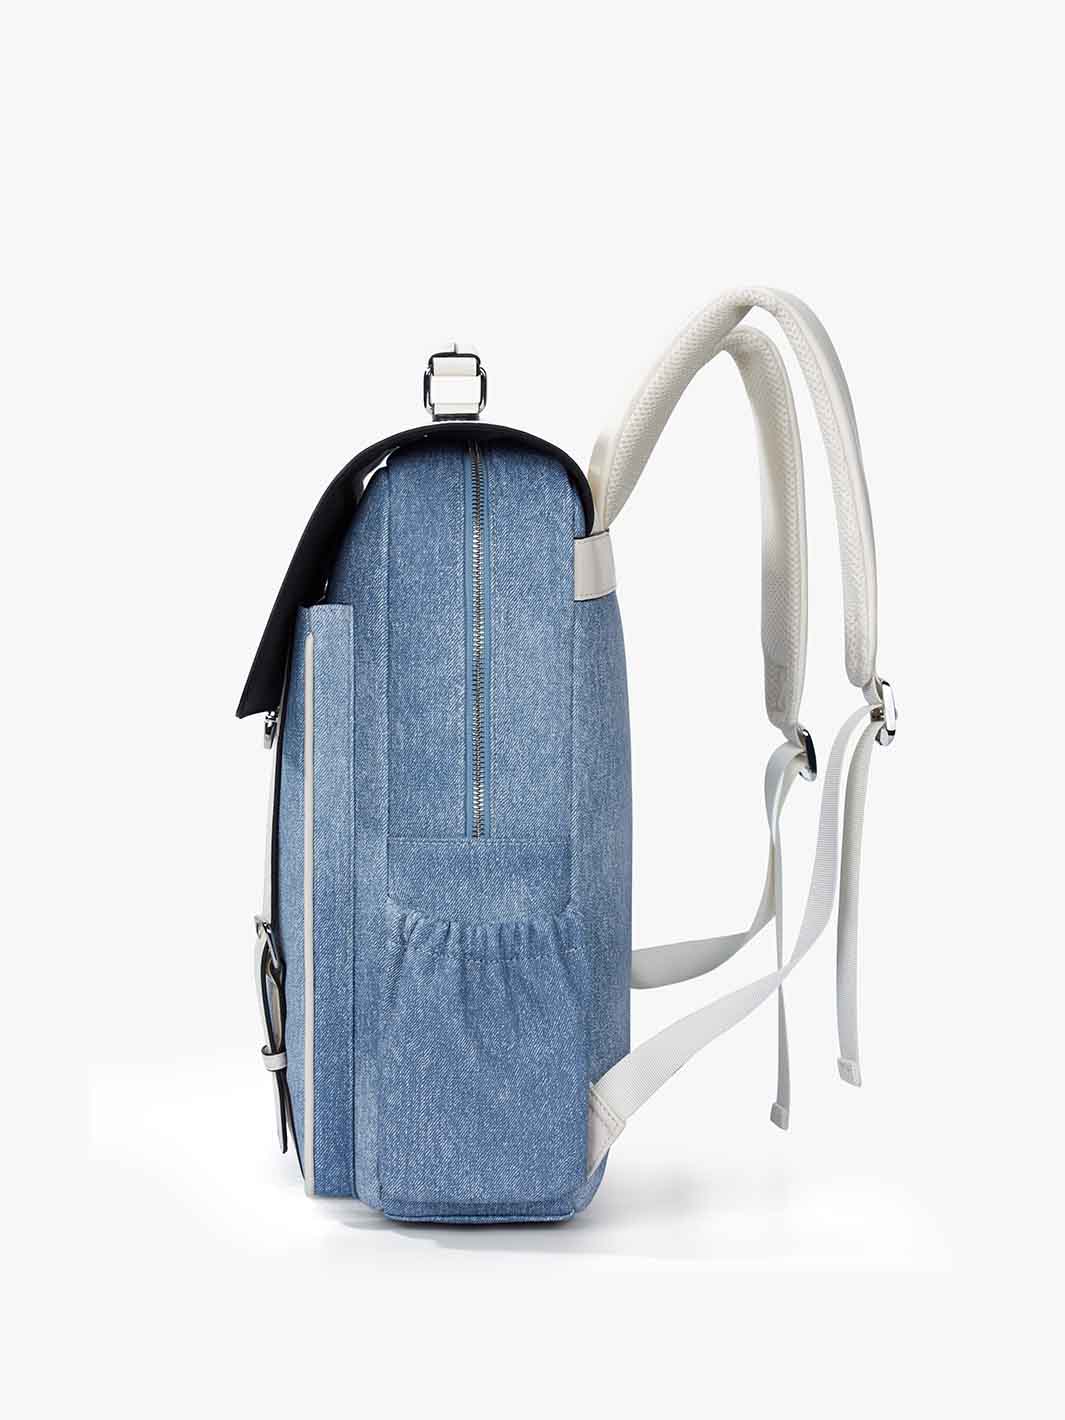 Trendy Travel Laptop Backpack with Denim-Inspired PU Fabric 